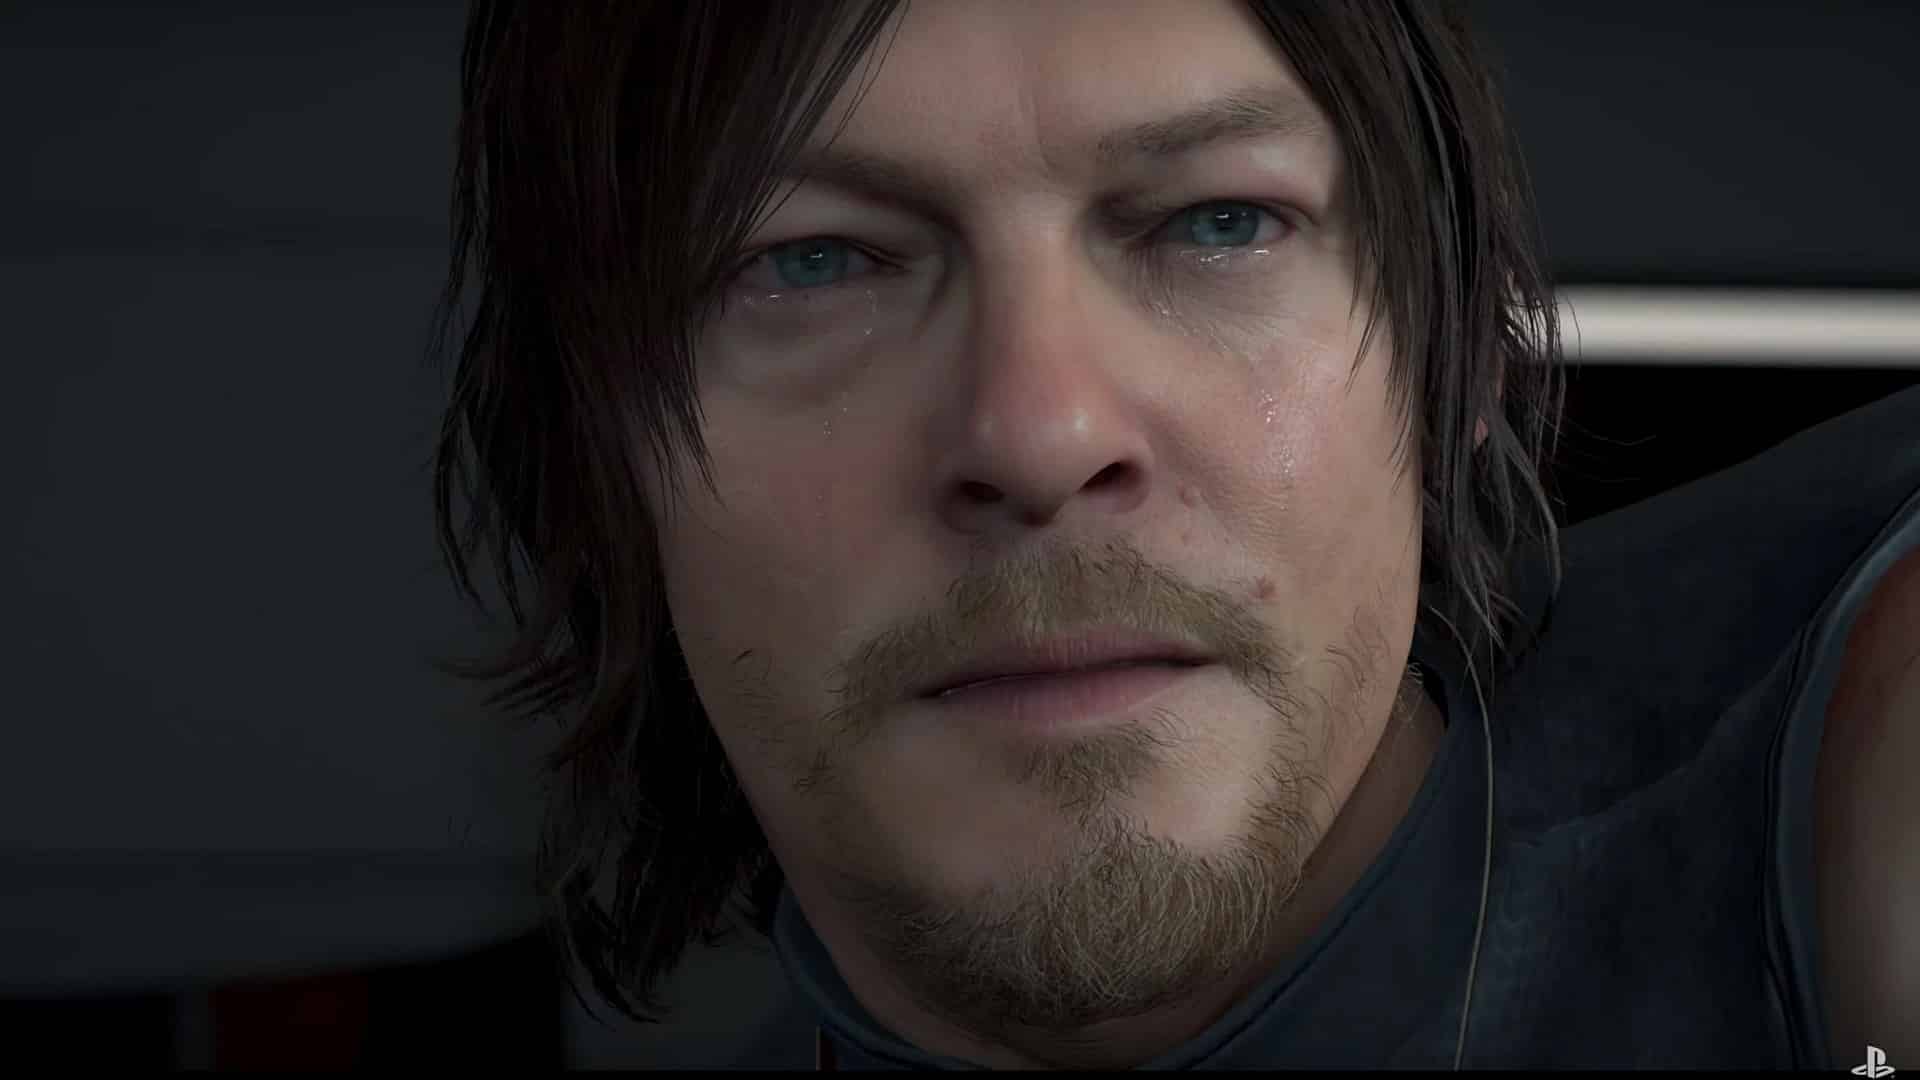 Close-up picture of Normal Reedus from Death Stranding.